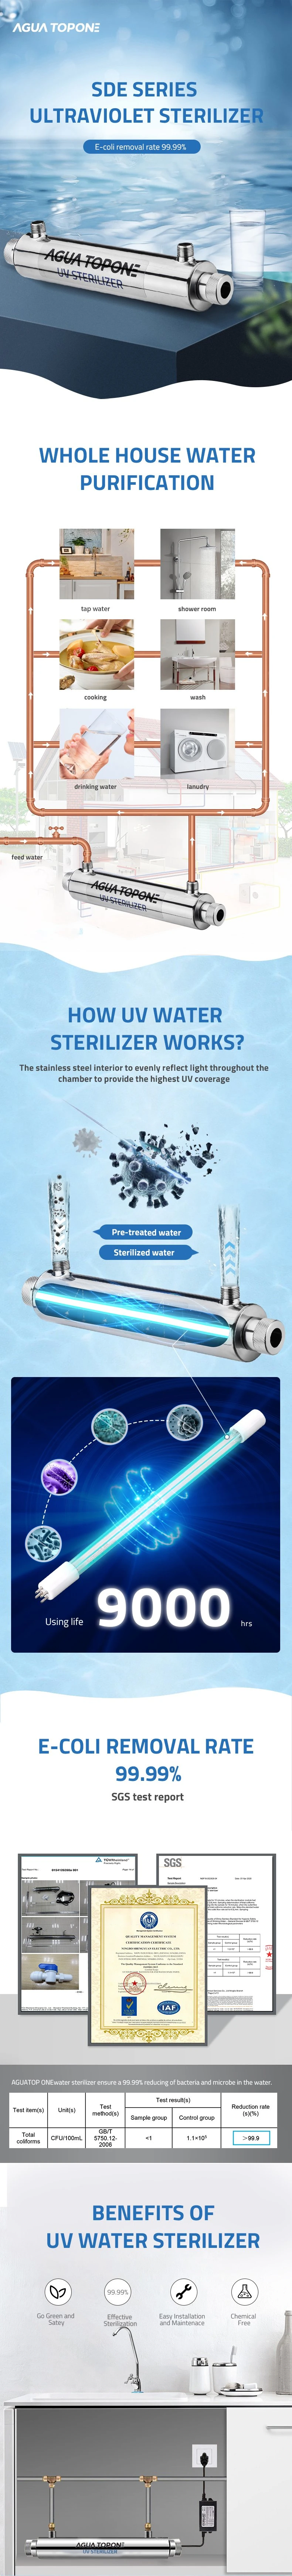 Point-of-Entry 55W Stainless Steel UV Ultraviolet Water Treatment Sterilizer Filter System for Water Softener